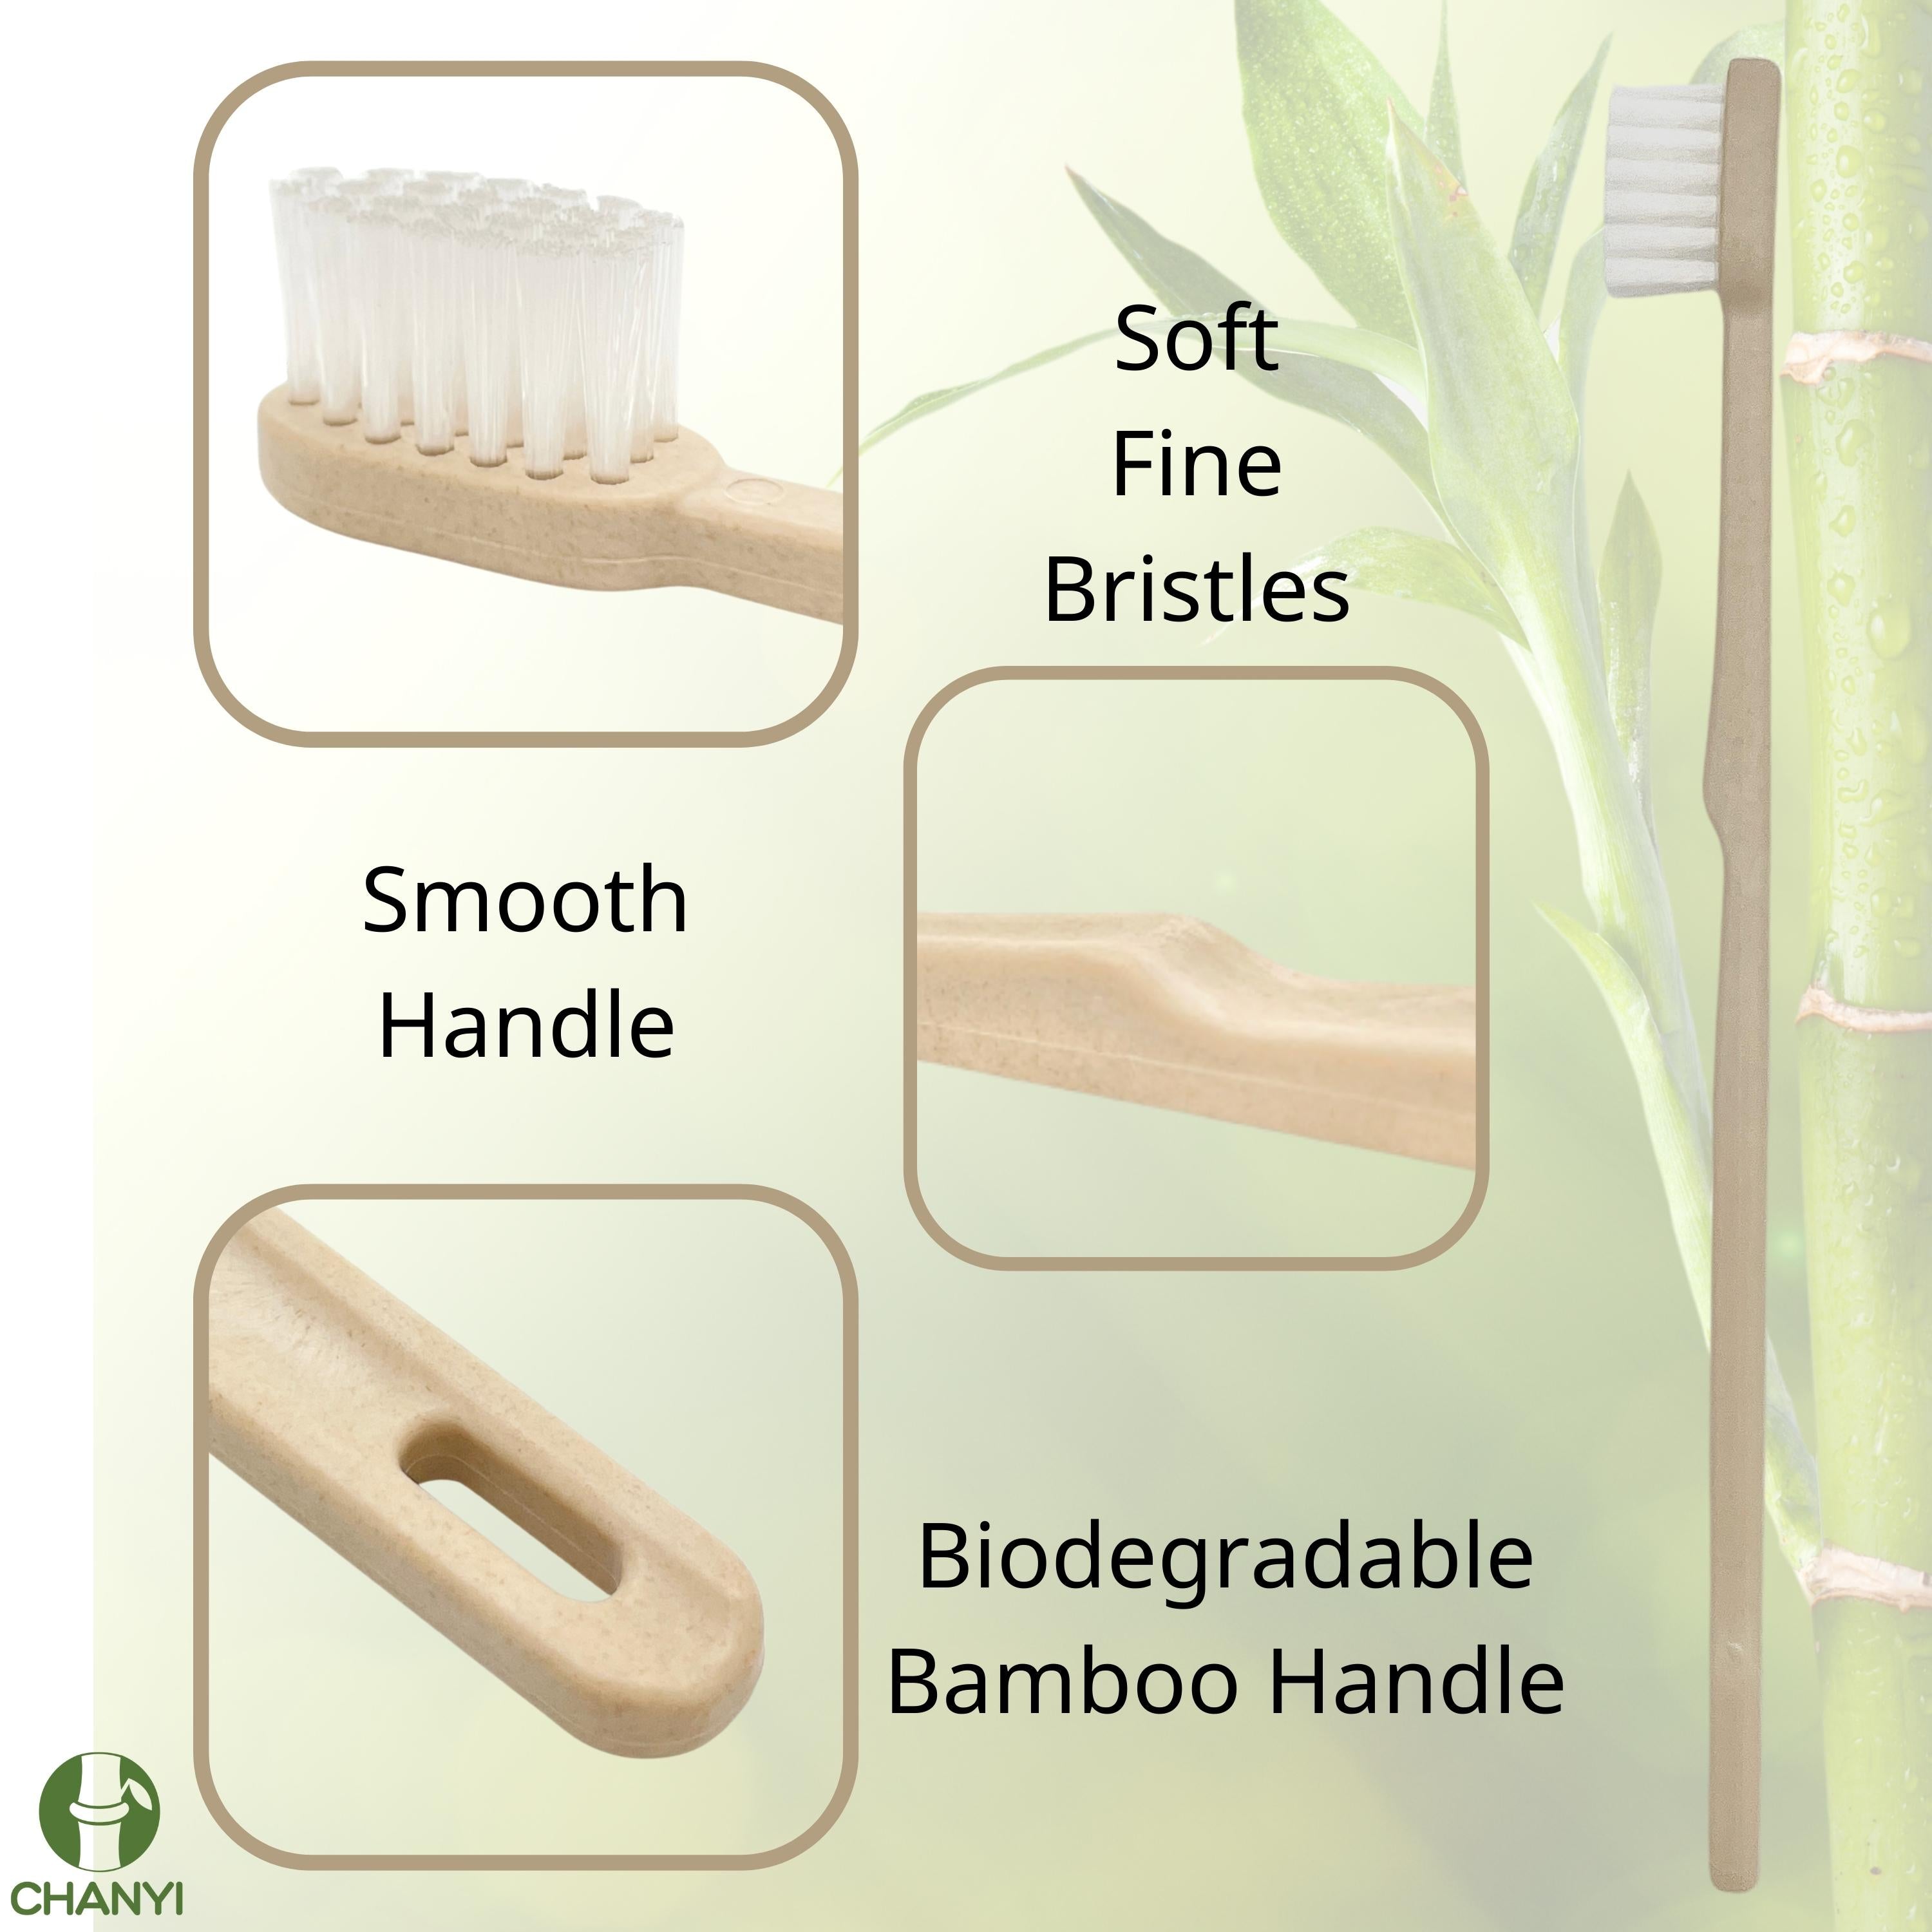 bpa-free soft bristles natural bamboo toothbrush green teeth brushes recyclable manual travel hotel kit adults eco-friendly toothbrushes 4 pcs- CHANYI eco